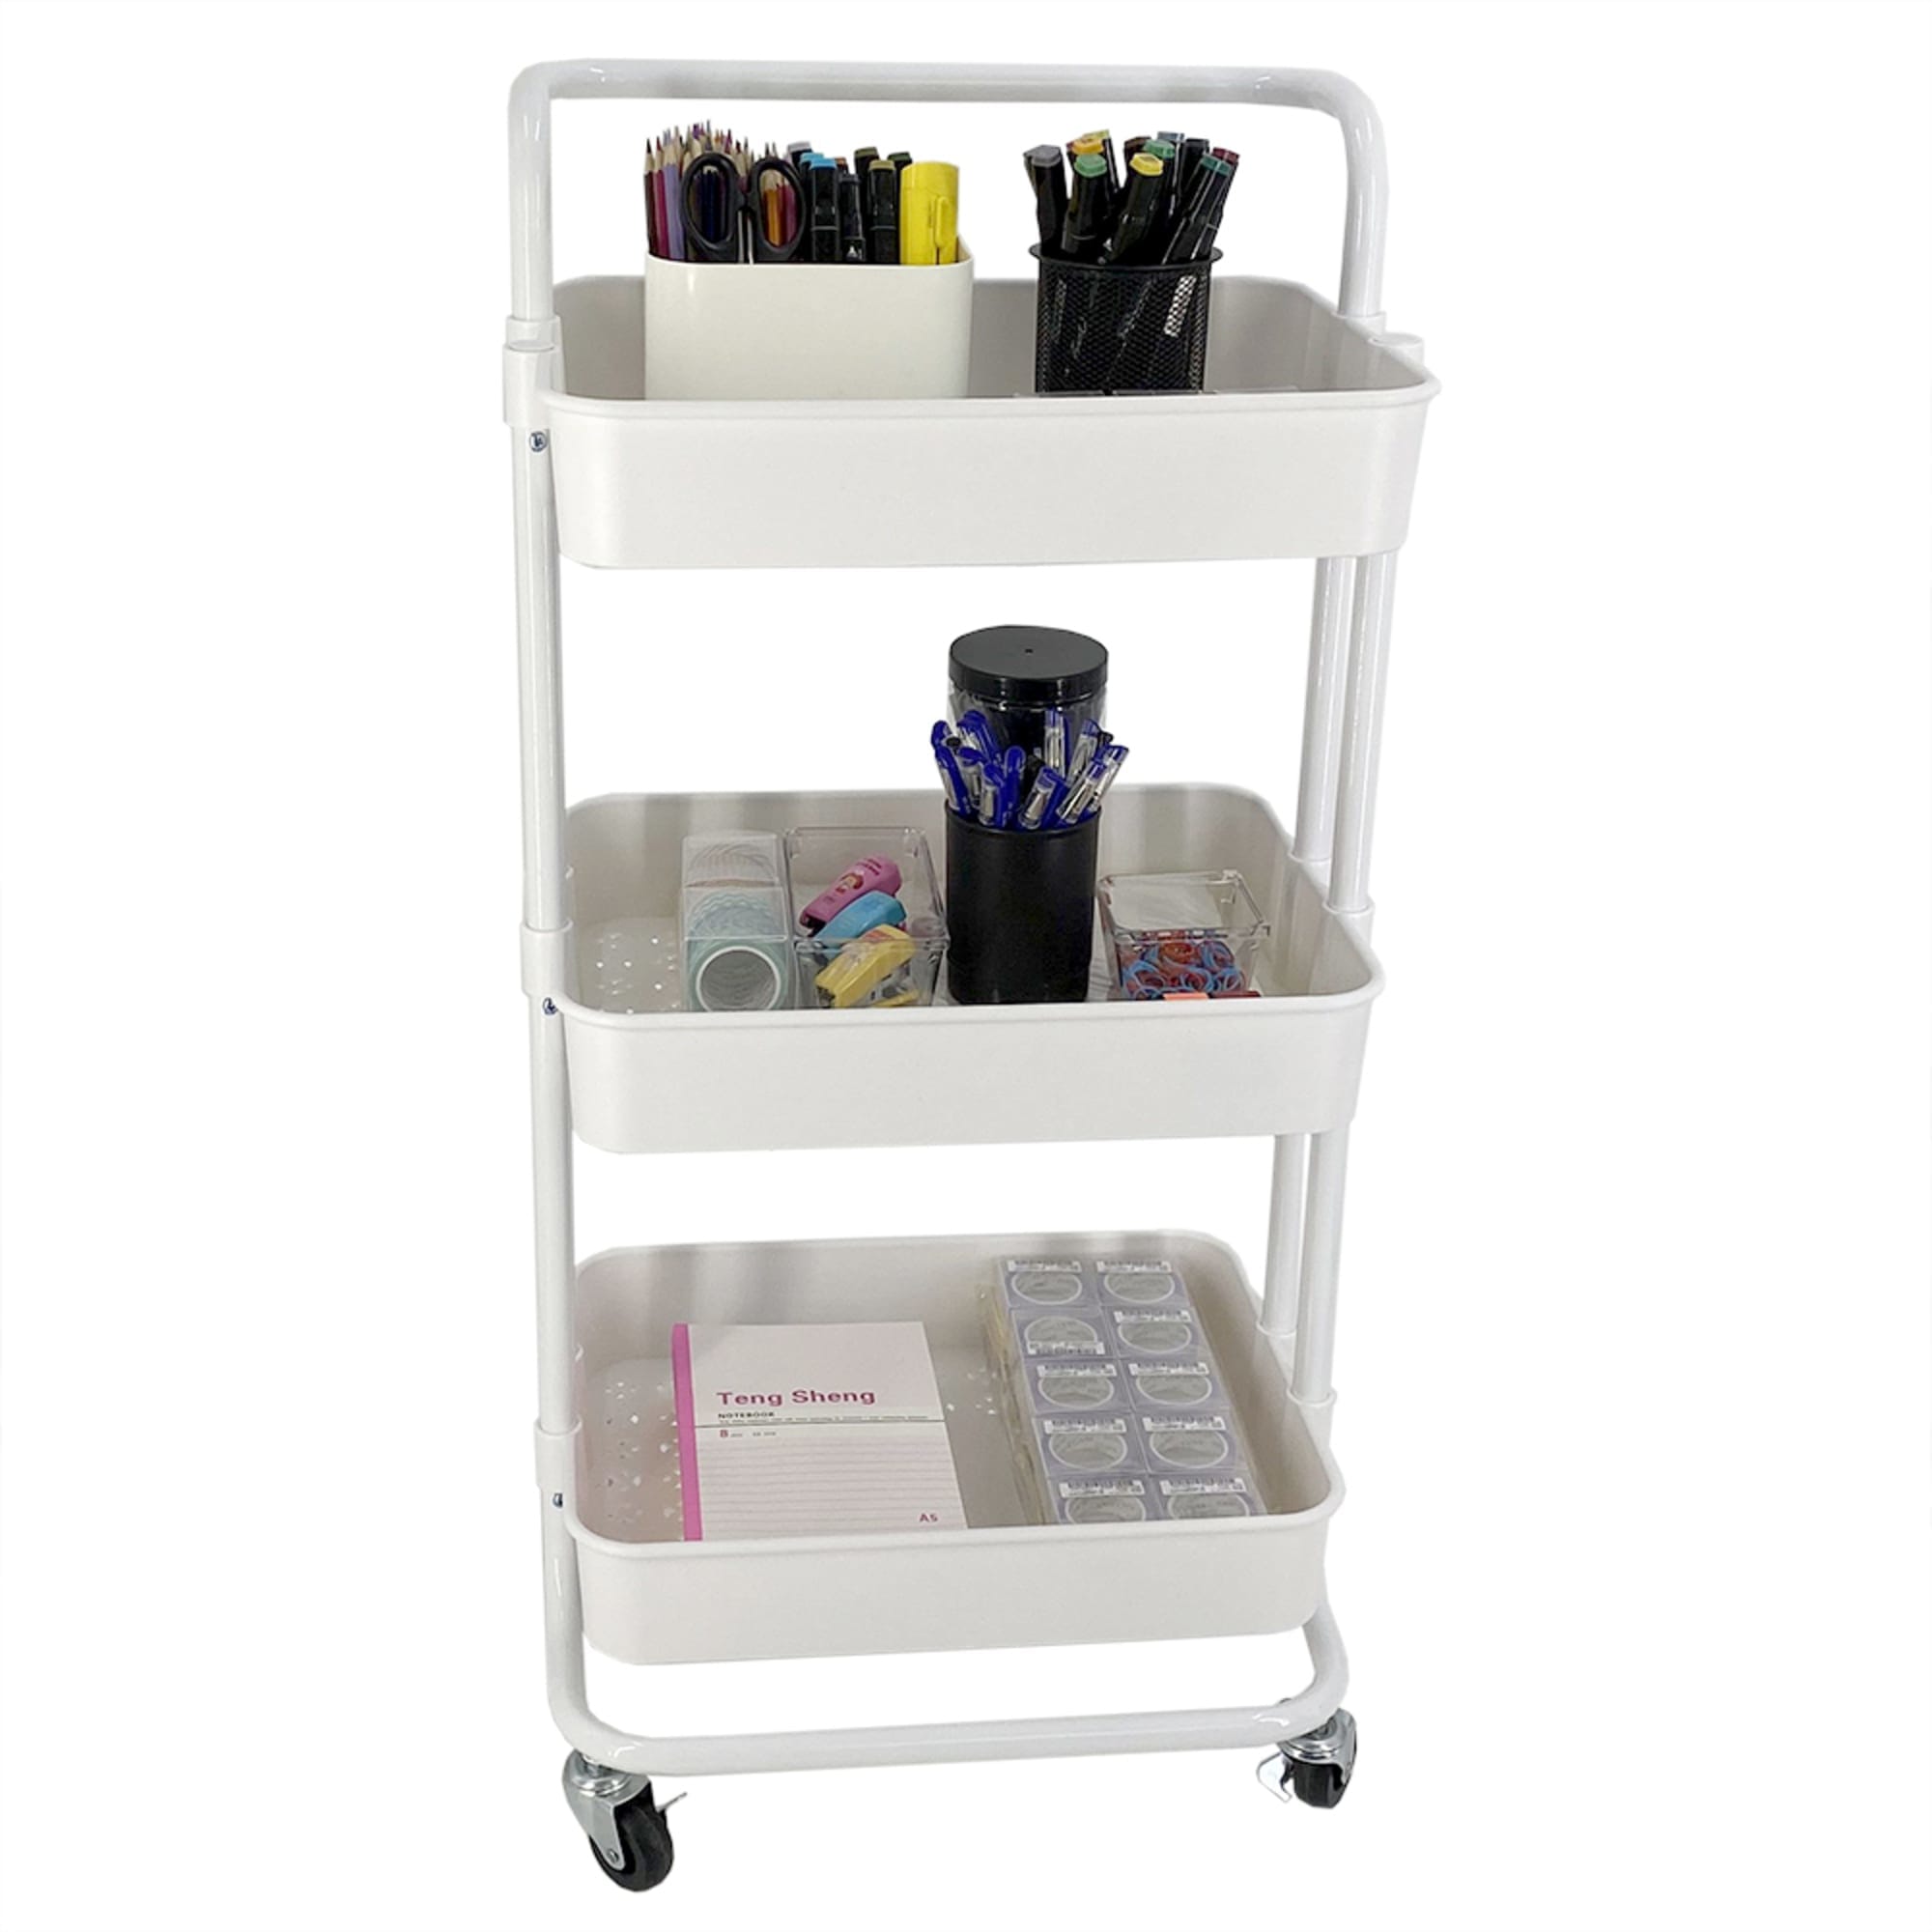 Home Basics 3 Tier Steel Rolling Utility Cart with 2 Locking Wheels, White $25.00 EACH, CASE PACK OF 3